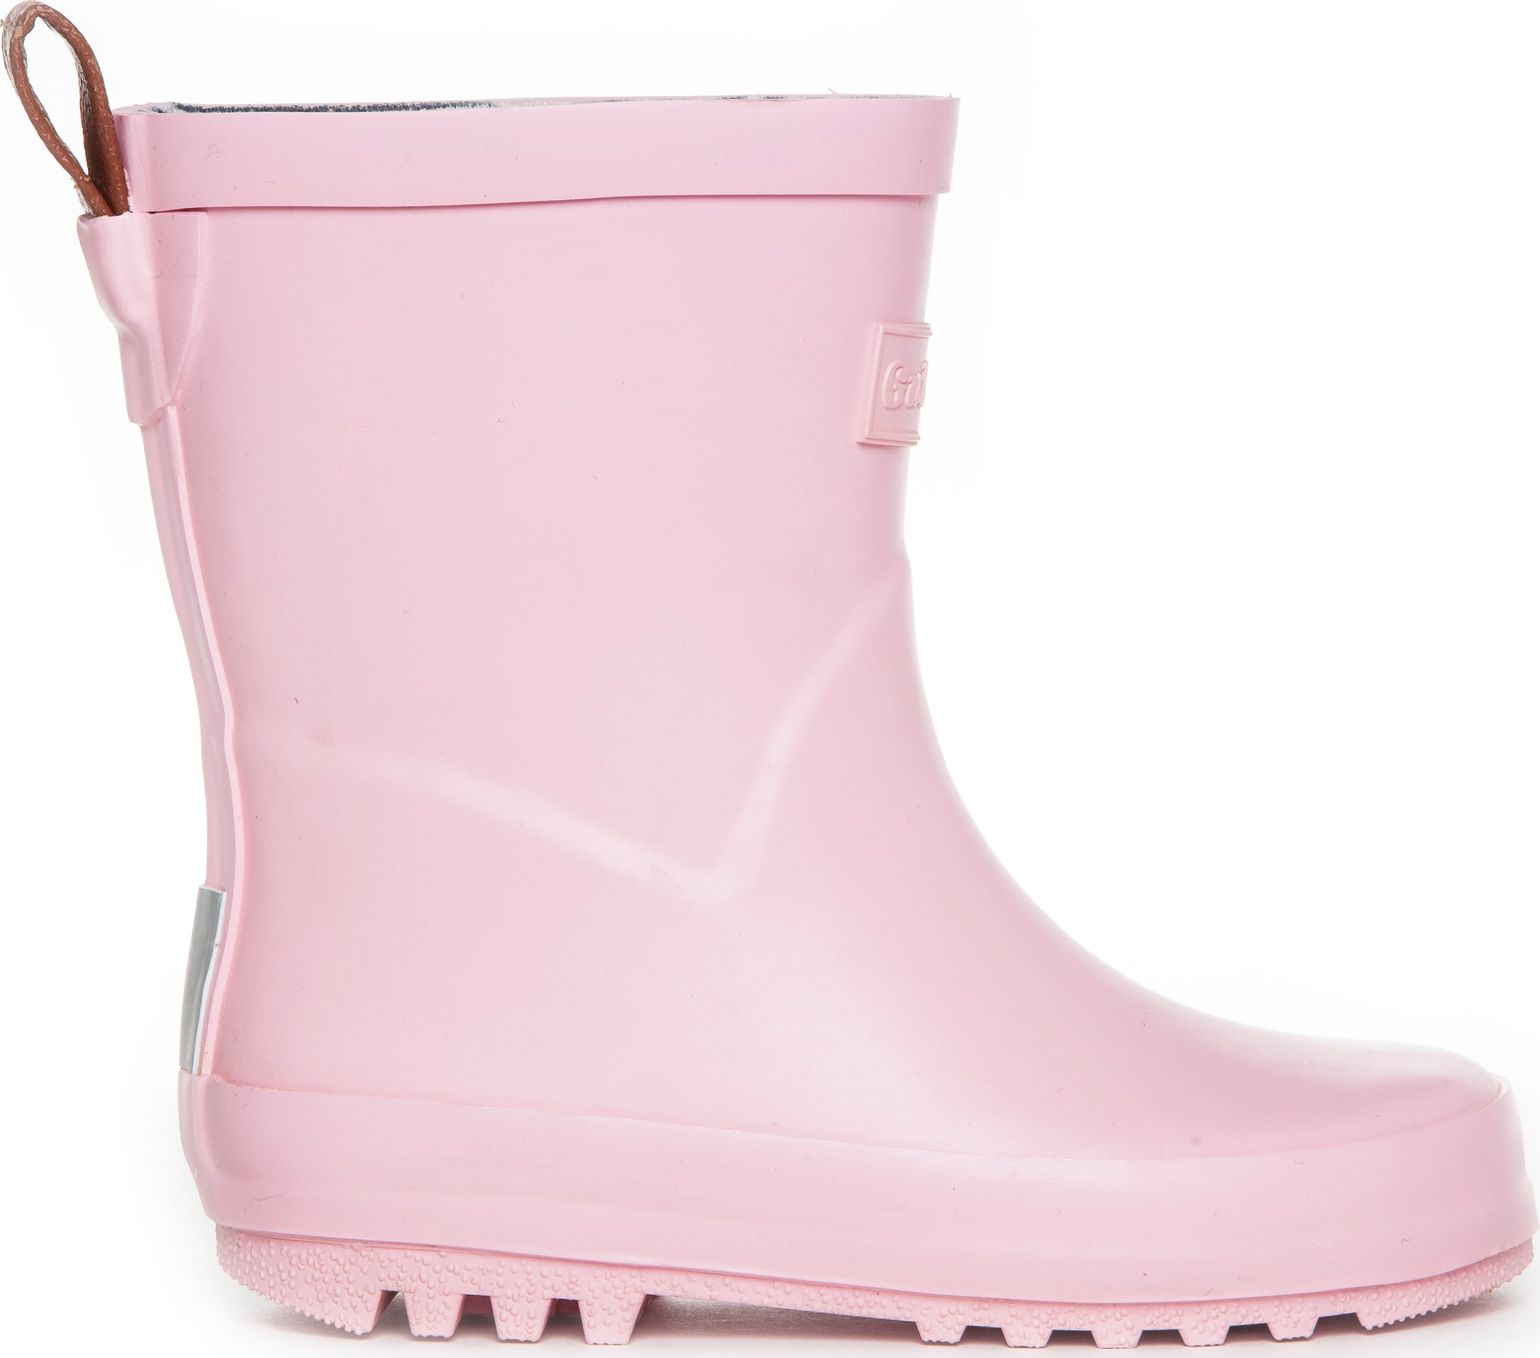 Kids' Rubberboots Pink